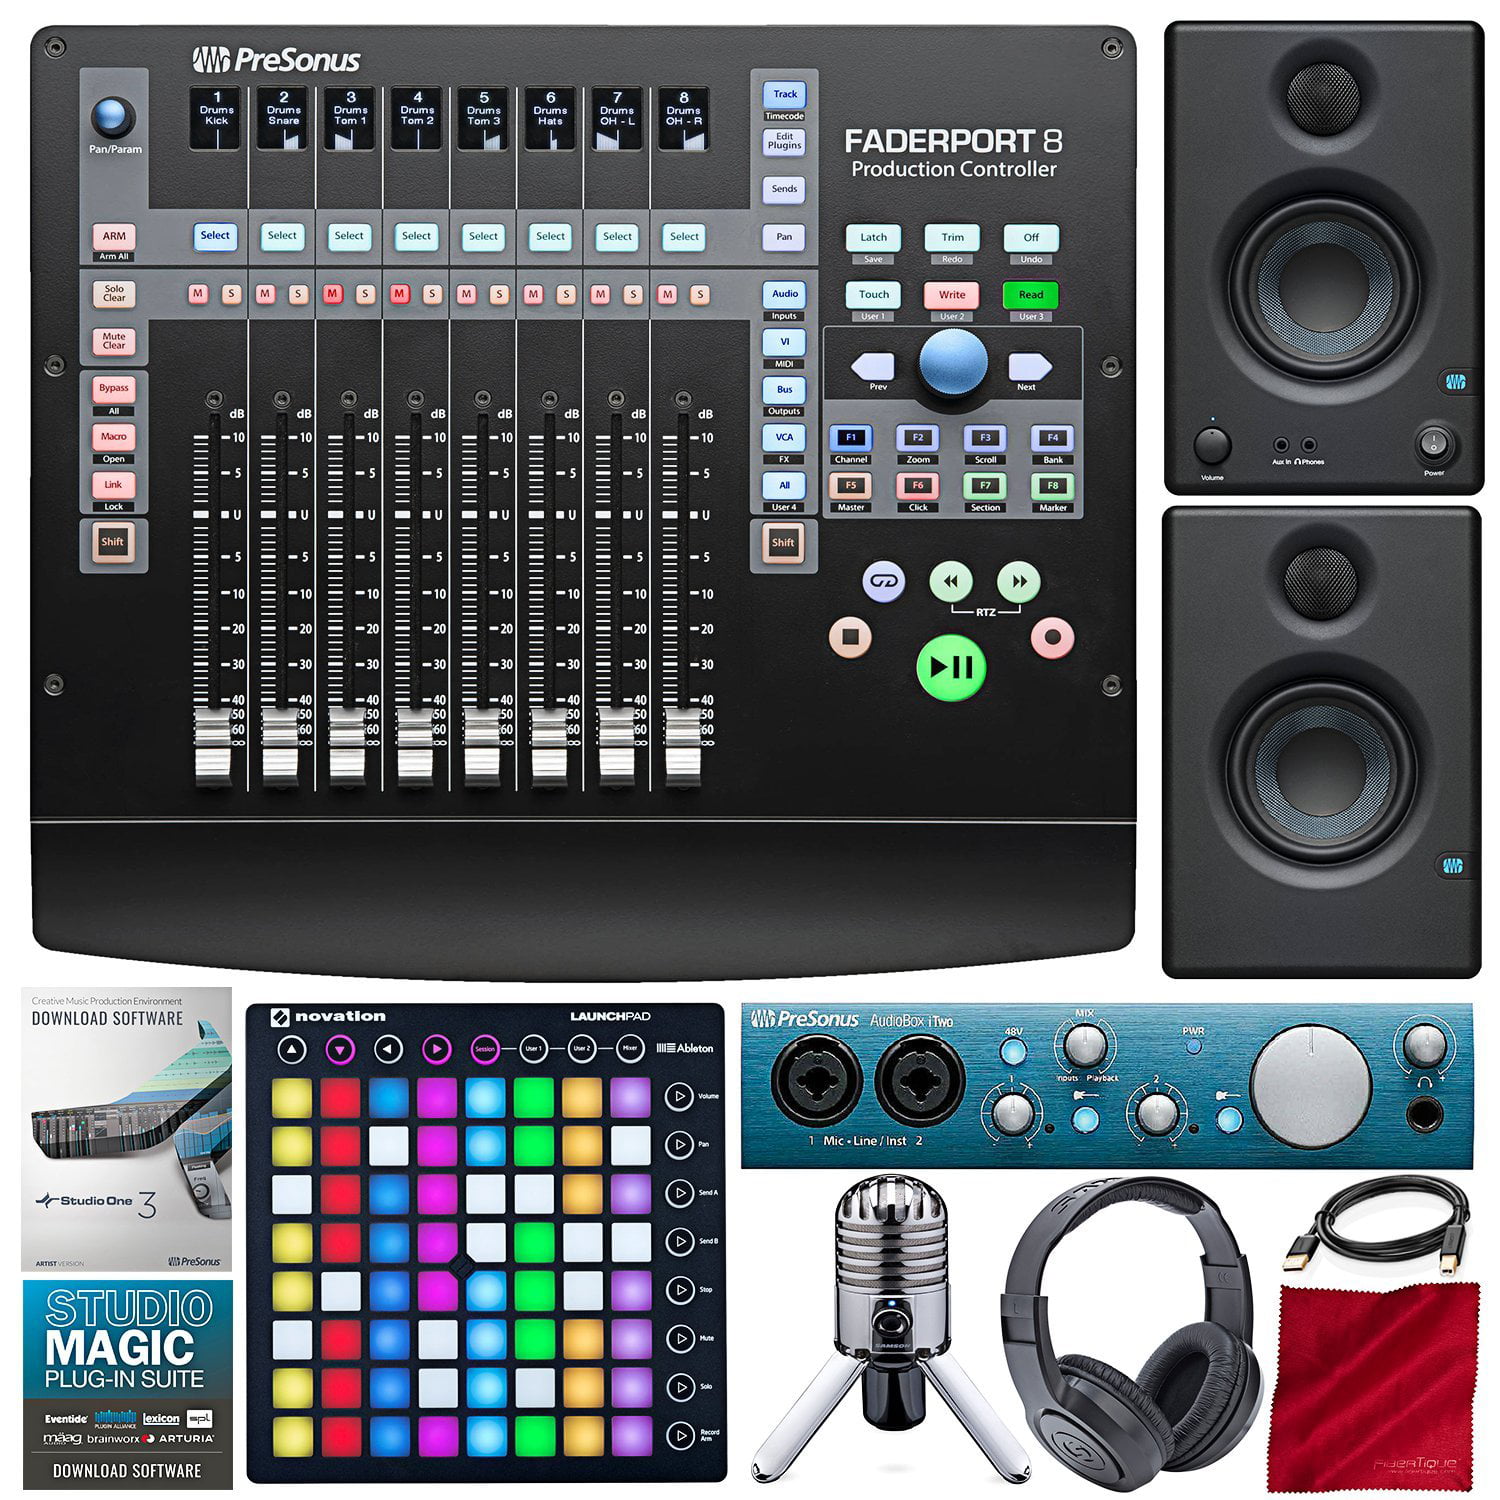 PreSonus FaderPort 8 channel Mix Production Controller with